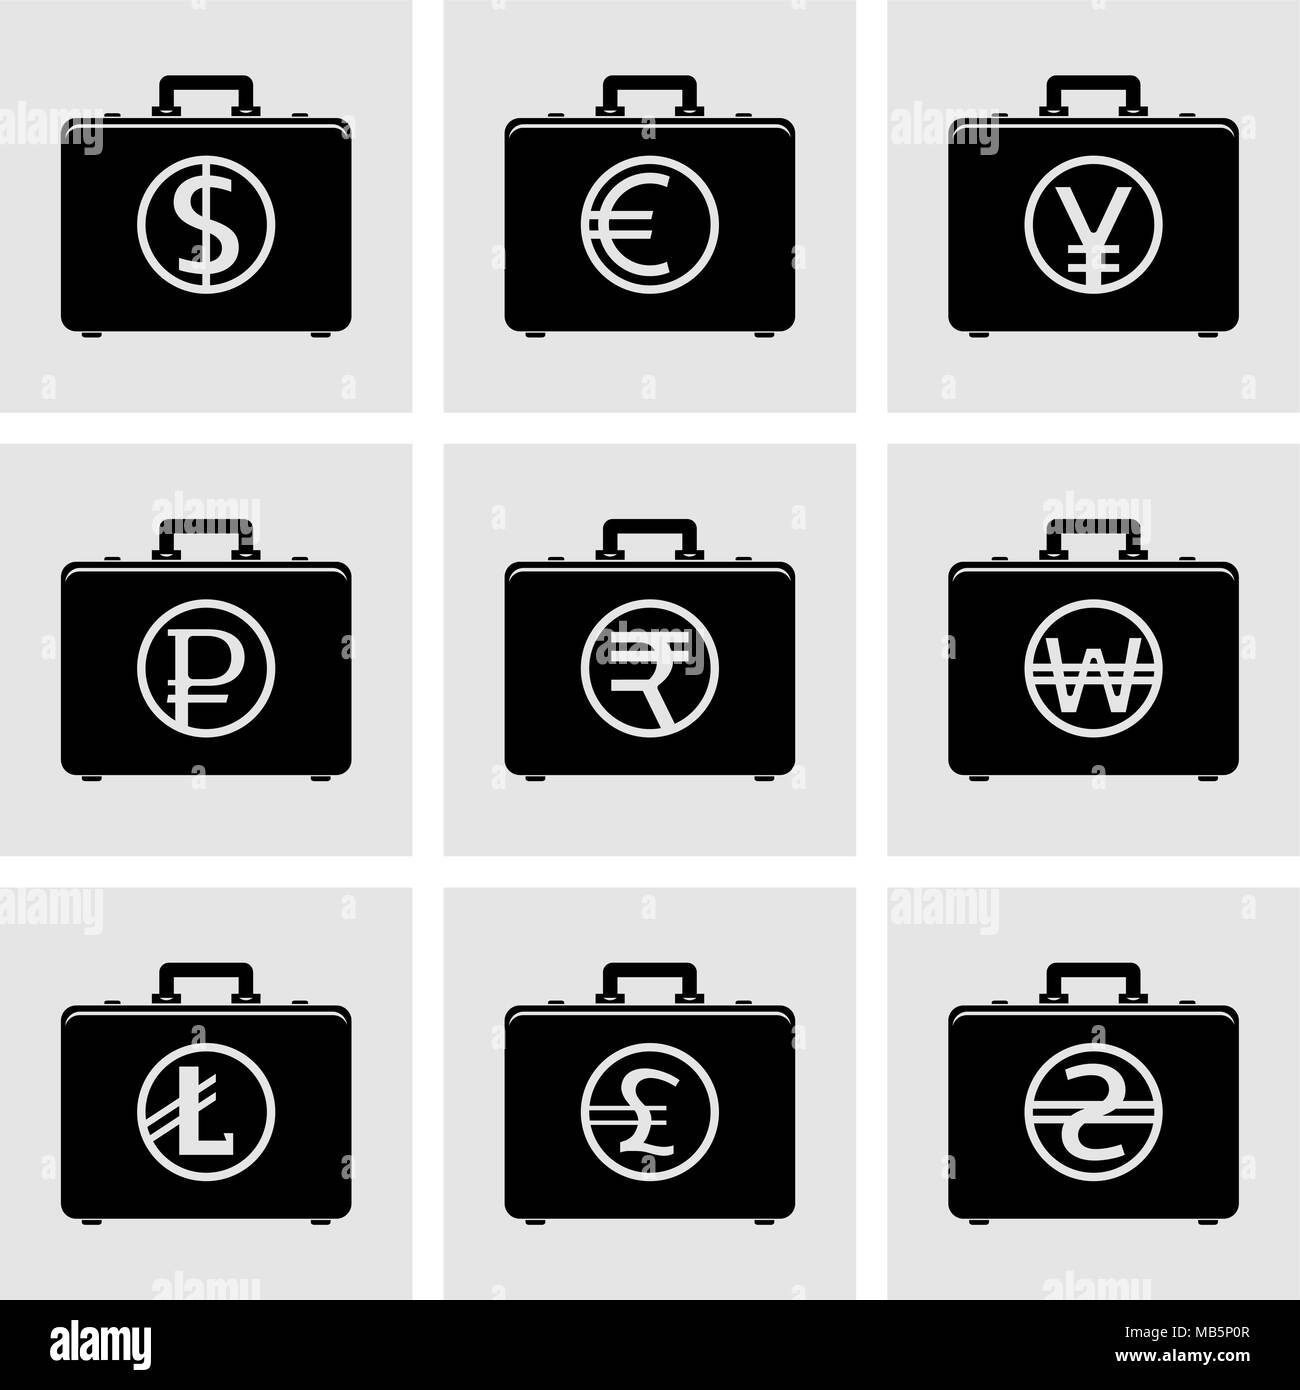 Briefcase icons with currency symbols Stock Vector